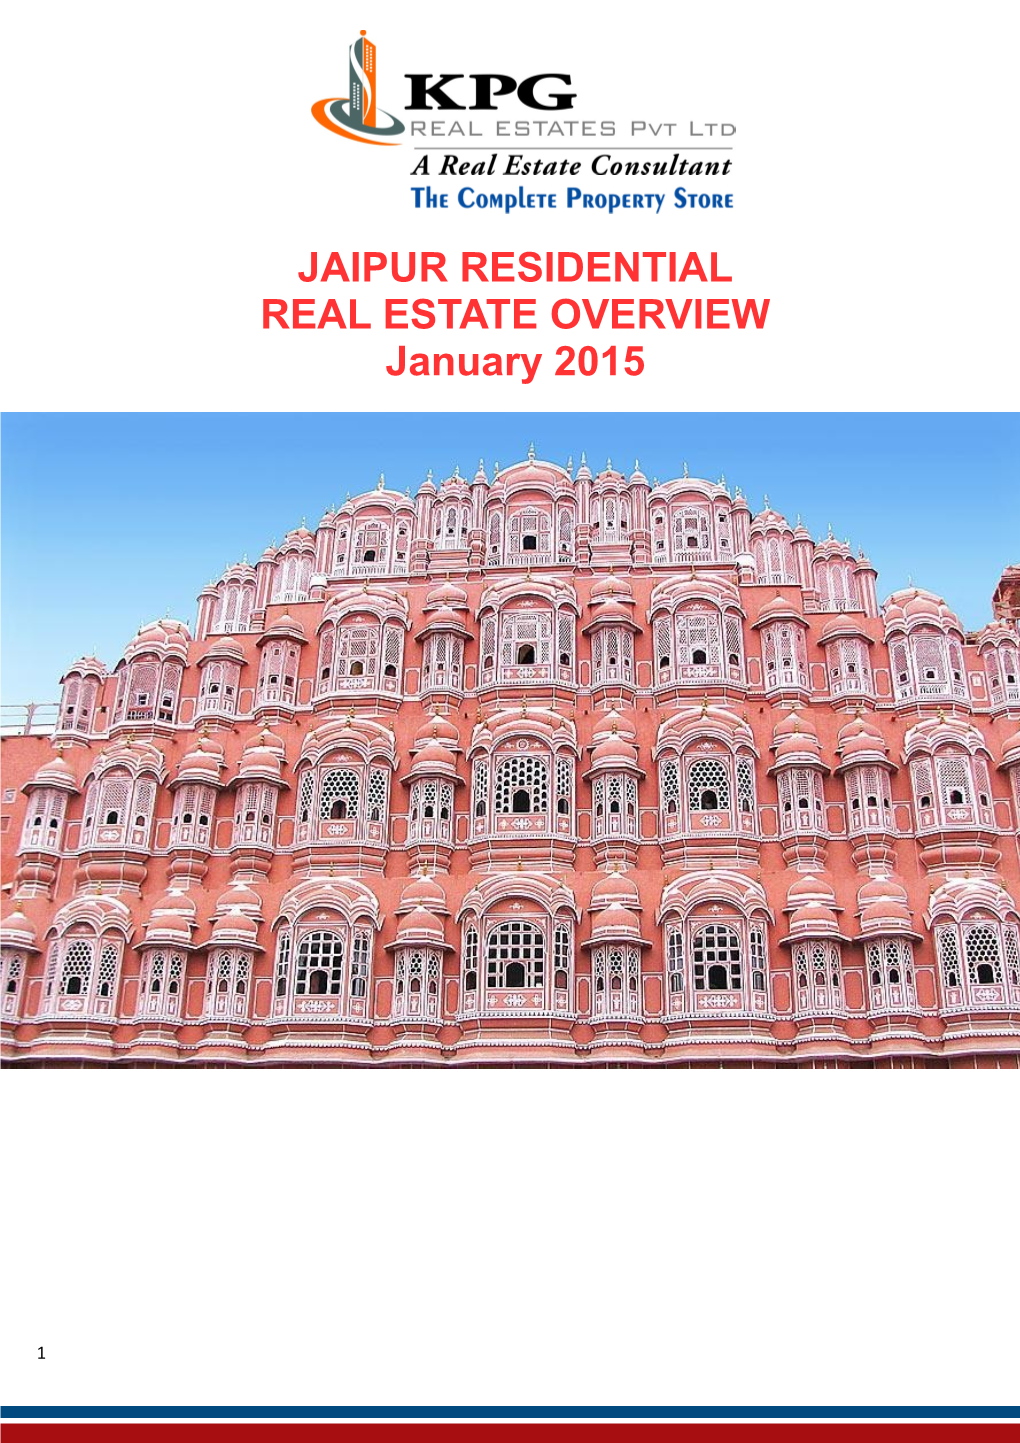 JAIPUR RESIDENTIAL REAL ESTATE OVERVIEW January 2015